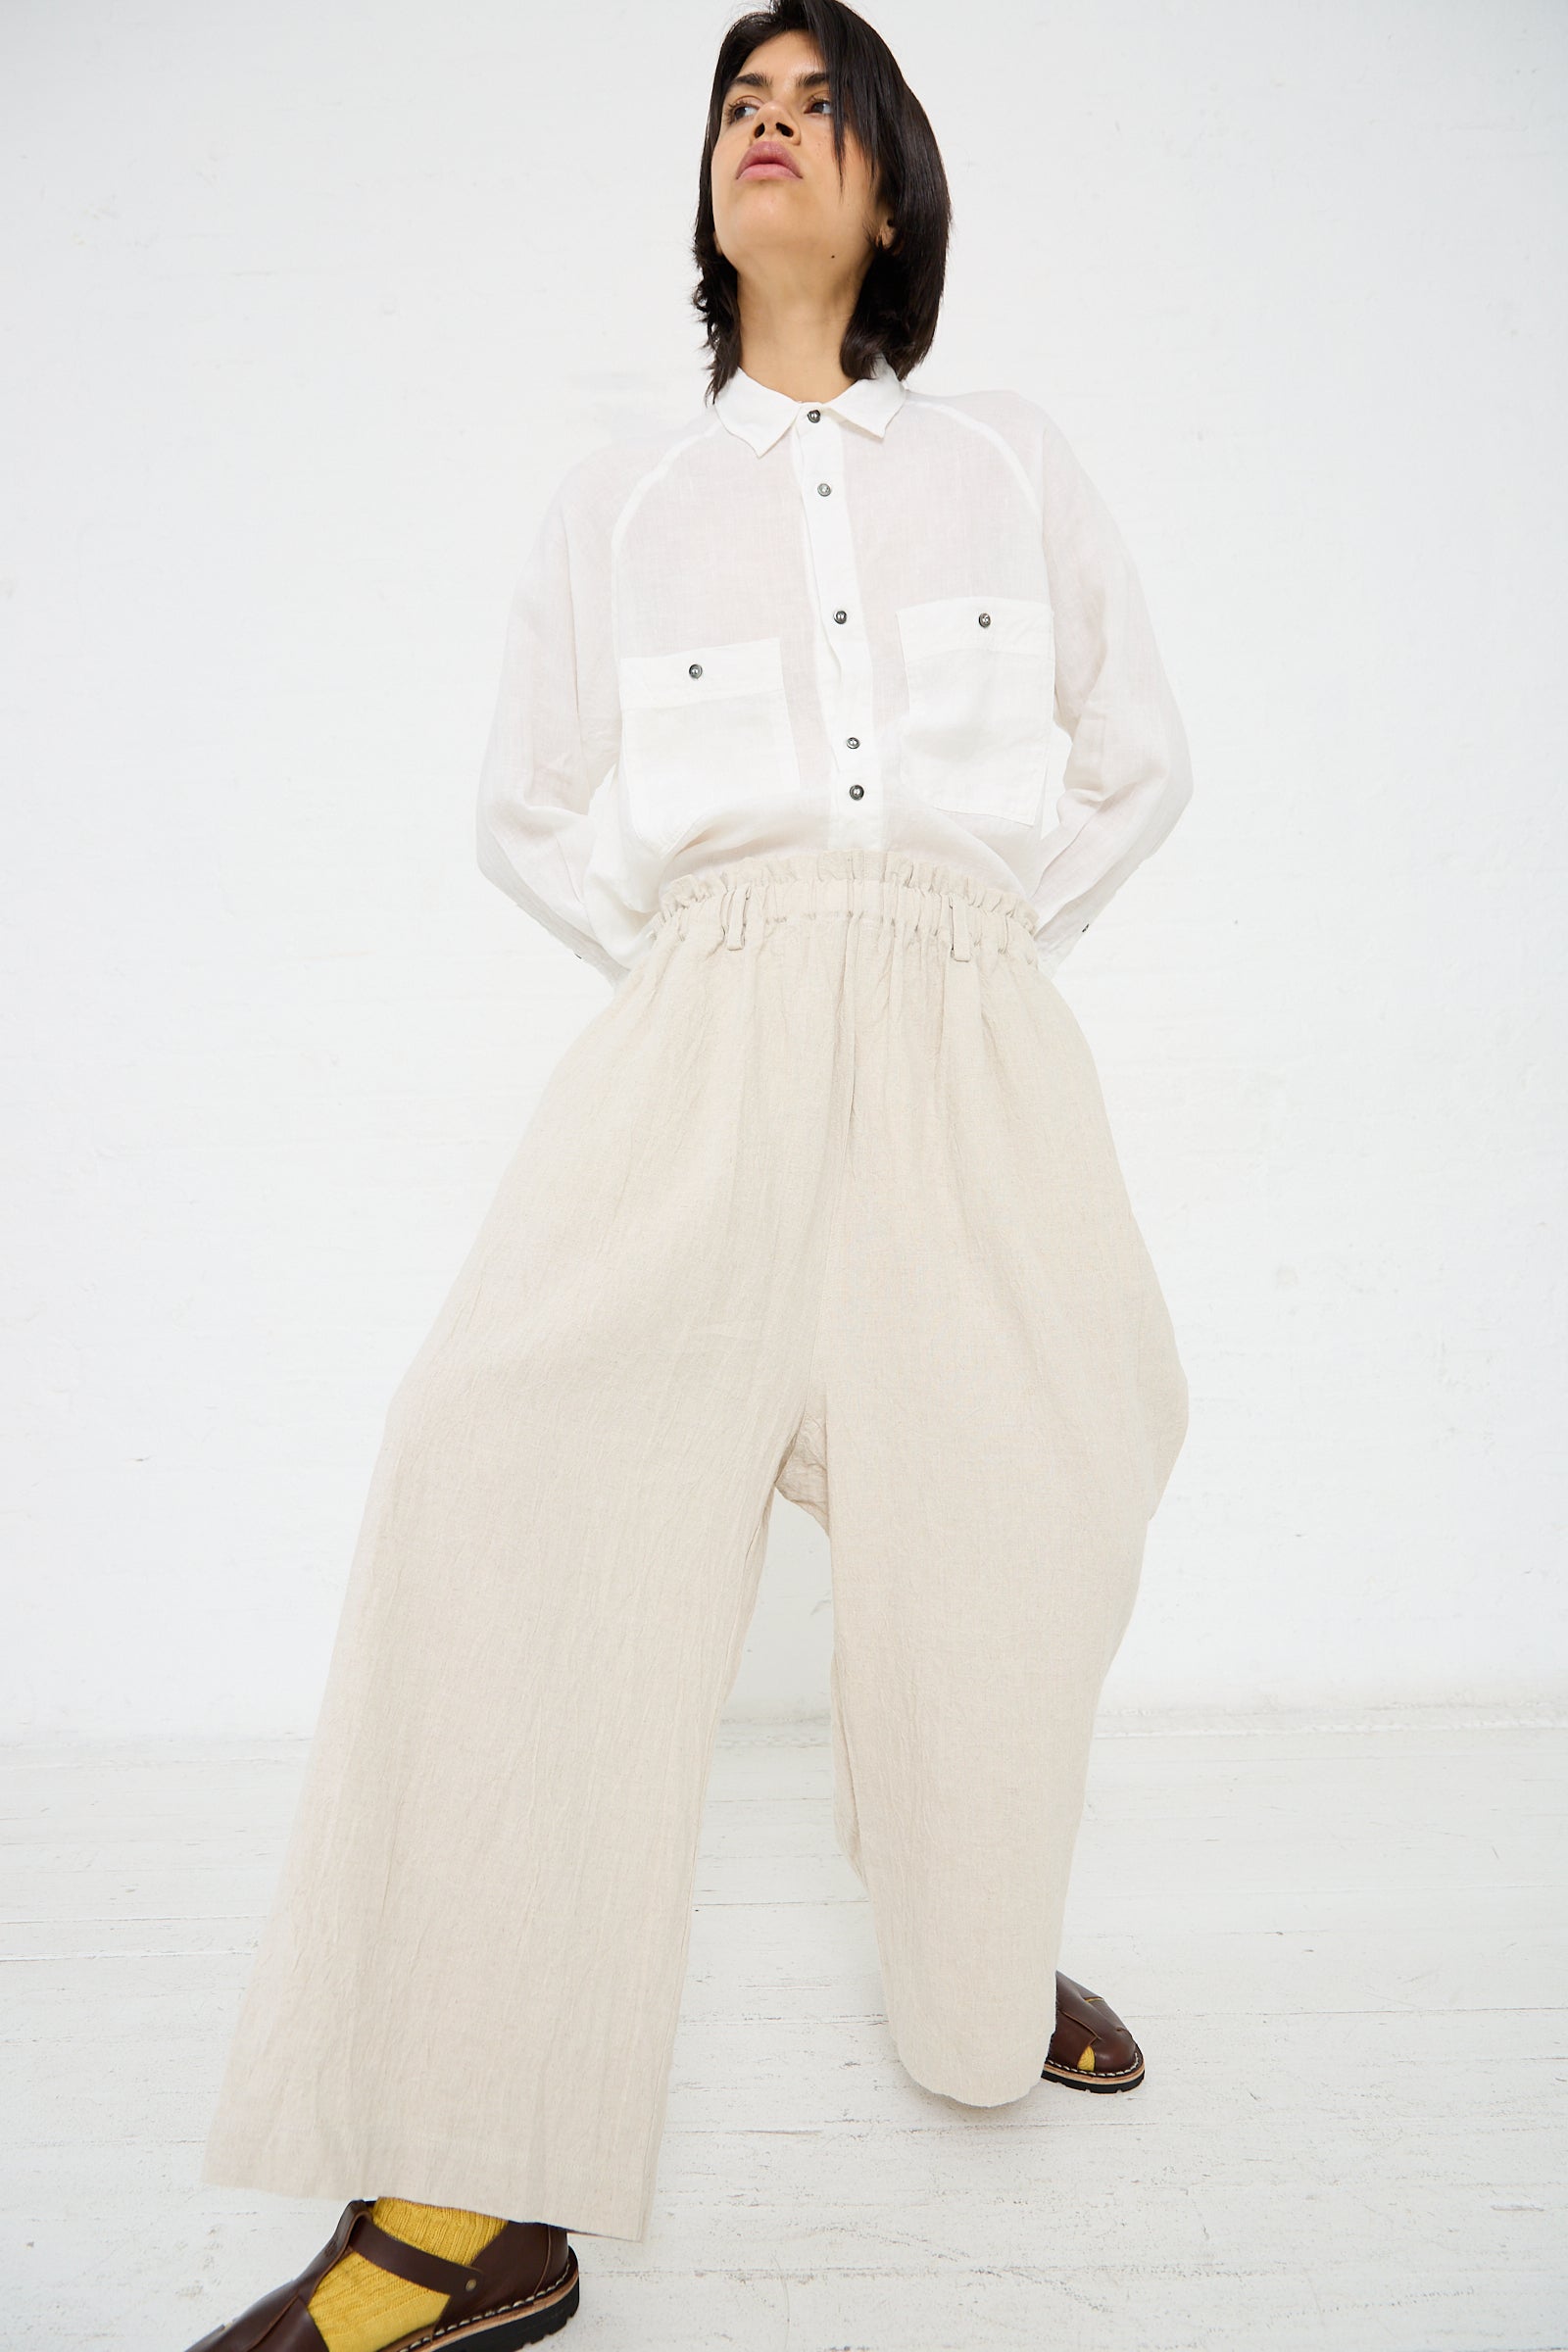 Person standing against a white background, wearing a relaxed fit white button-up shirt and Linen Vintage Pant in Natural by Ichi Antiquités, paired with yellow socks and brown sandals.